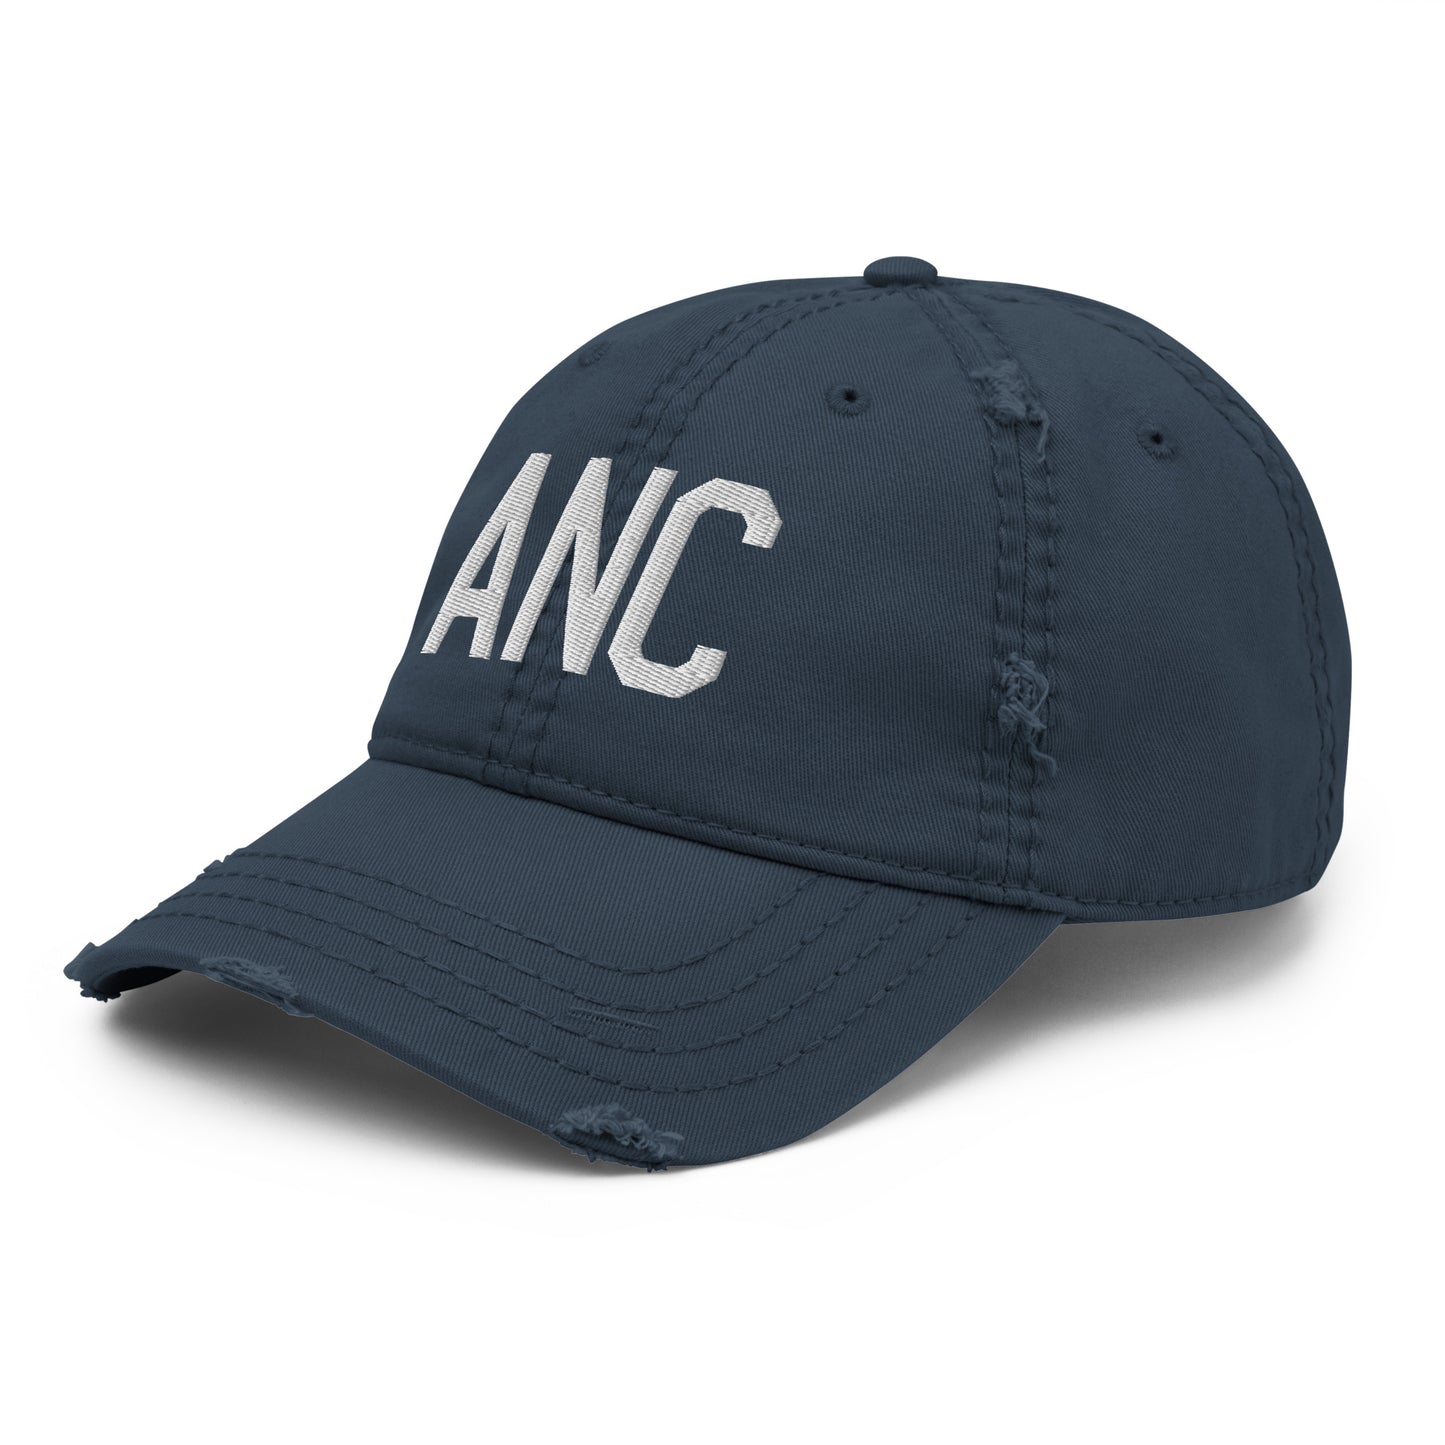 Airport Code Distressed Hat - White • ANC Anchorage • YHM Designs - Image 01